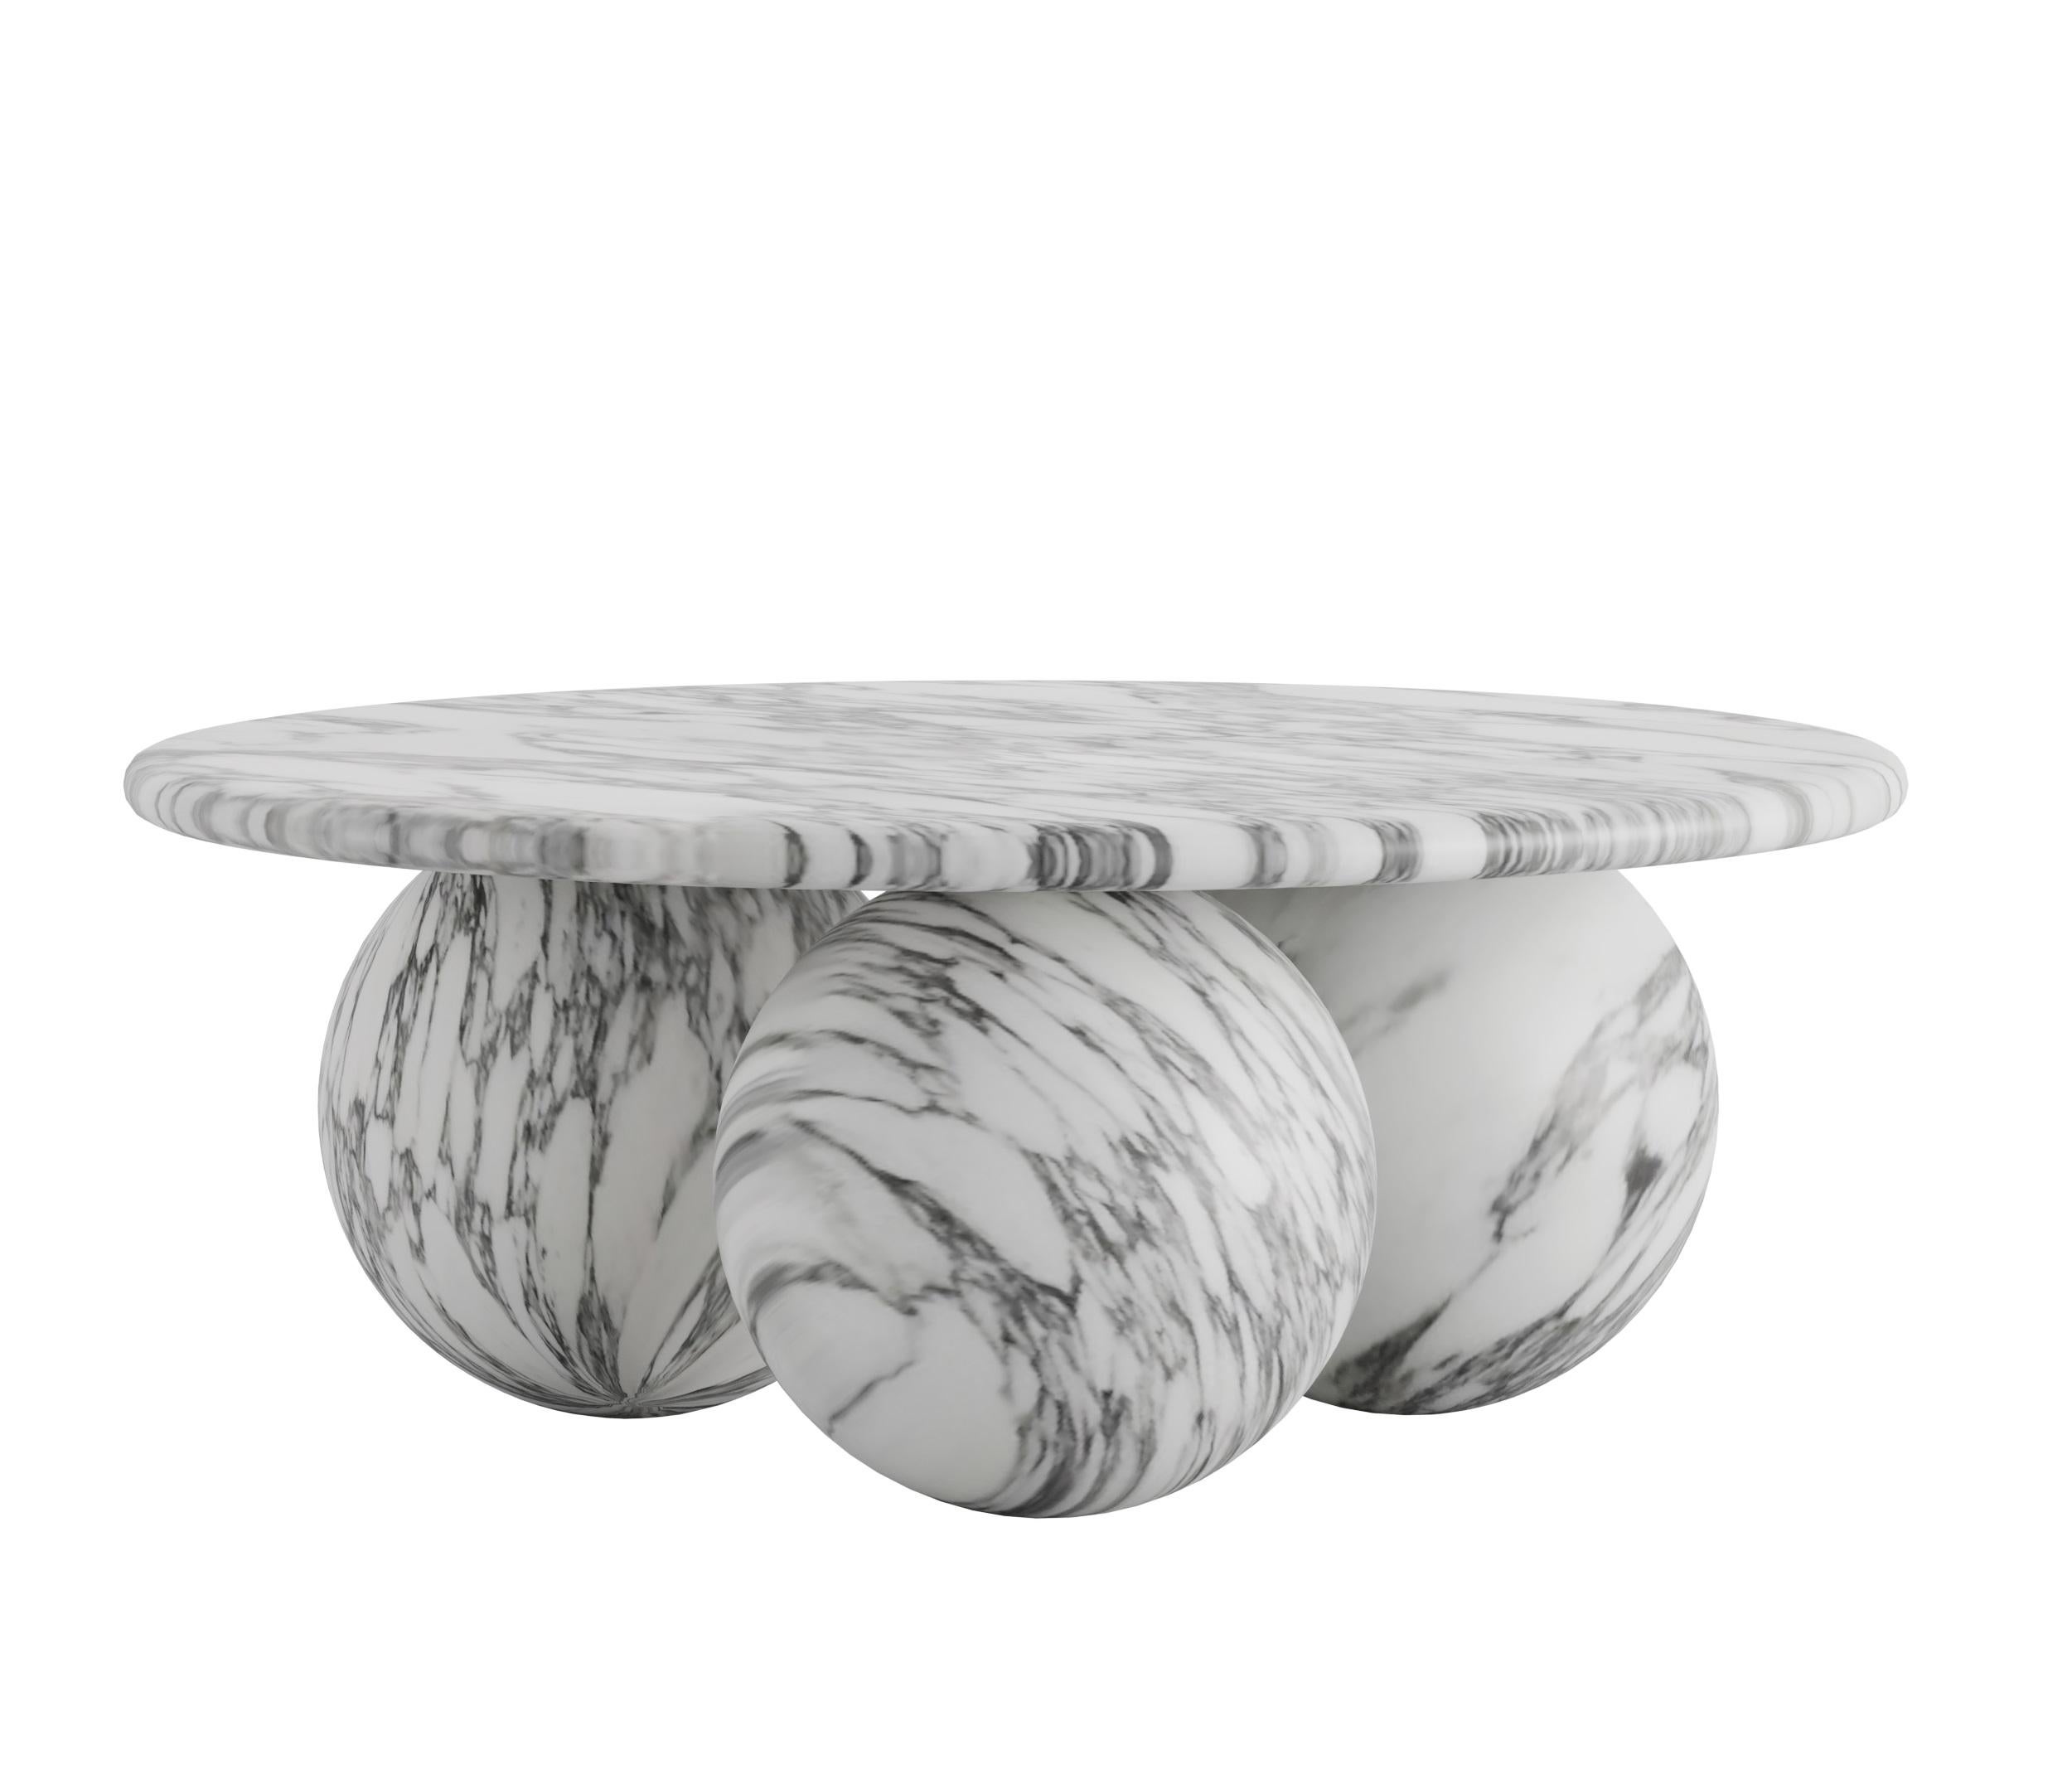 Oxley Center Table is a masterpiece in its own right, showcasing the inherent allure of natural Italian marble. The table's surface boasts a symphony of delicate veining, an exquisite result of nature's unique handiwork. With no two pieces alike,